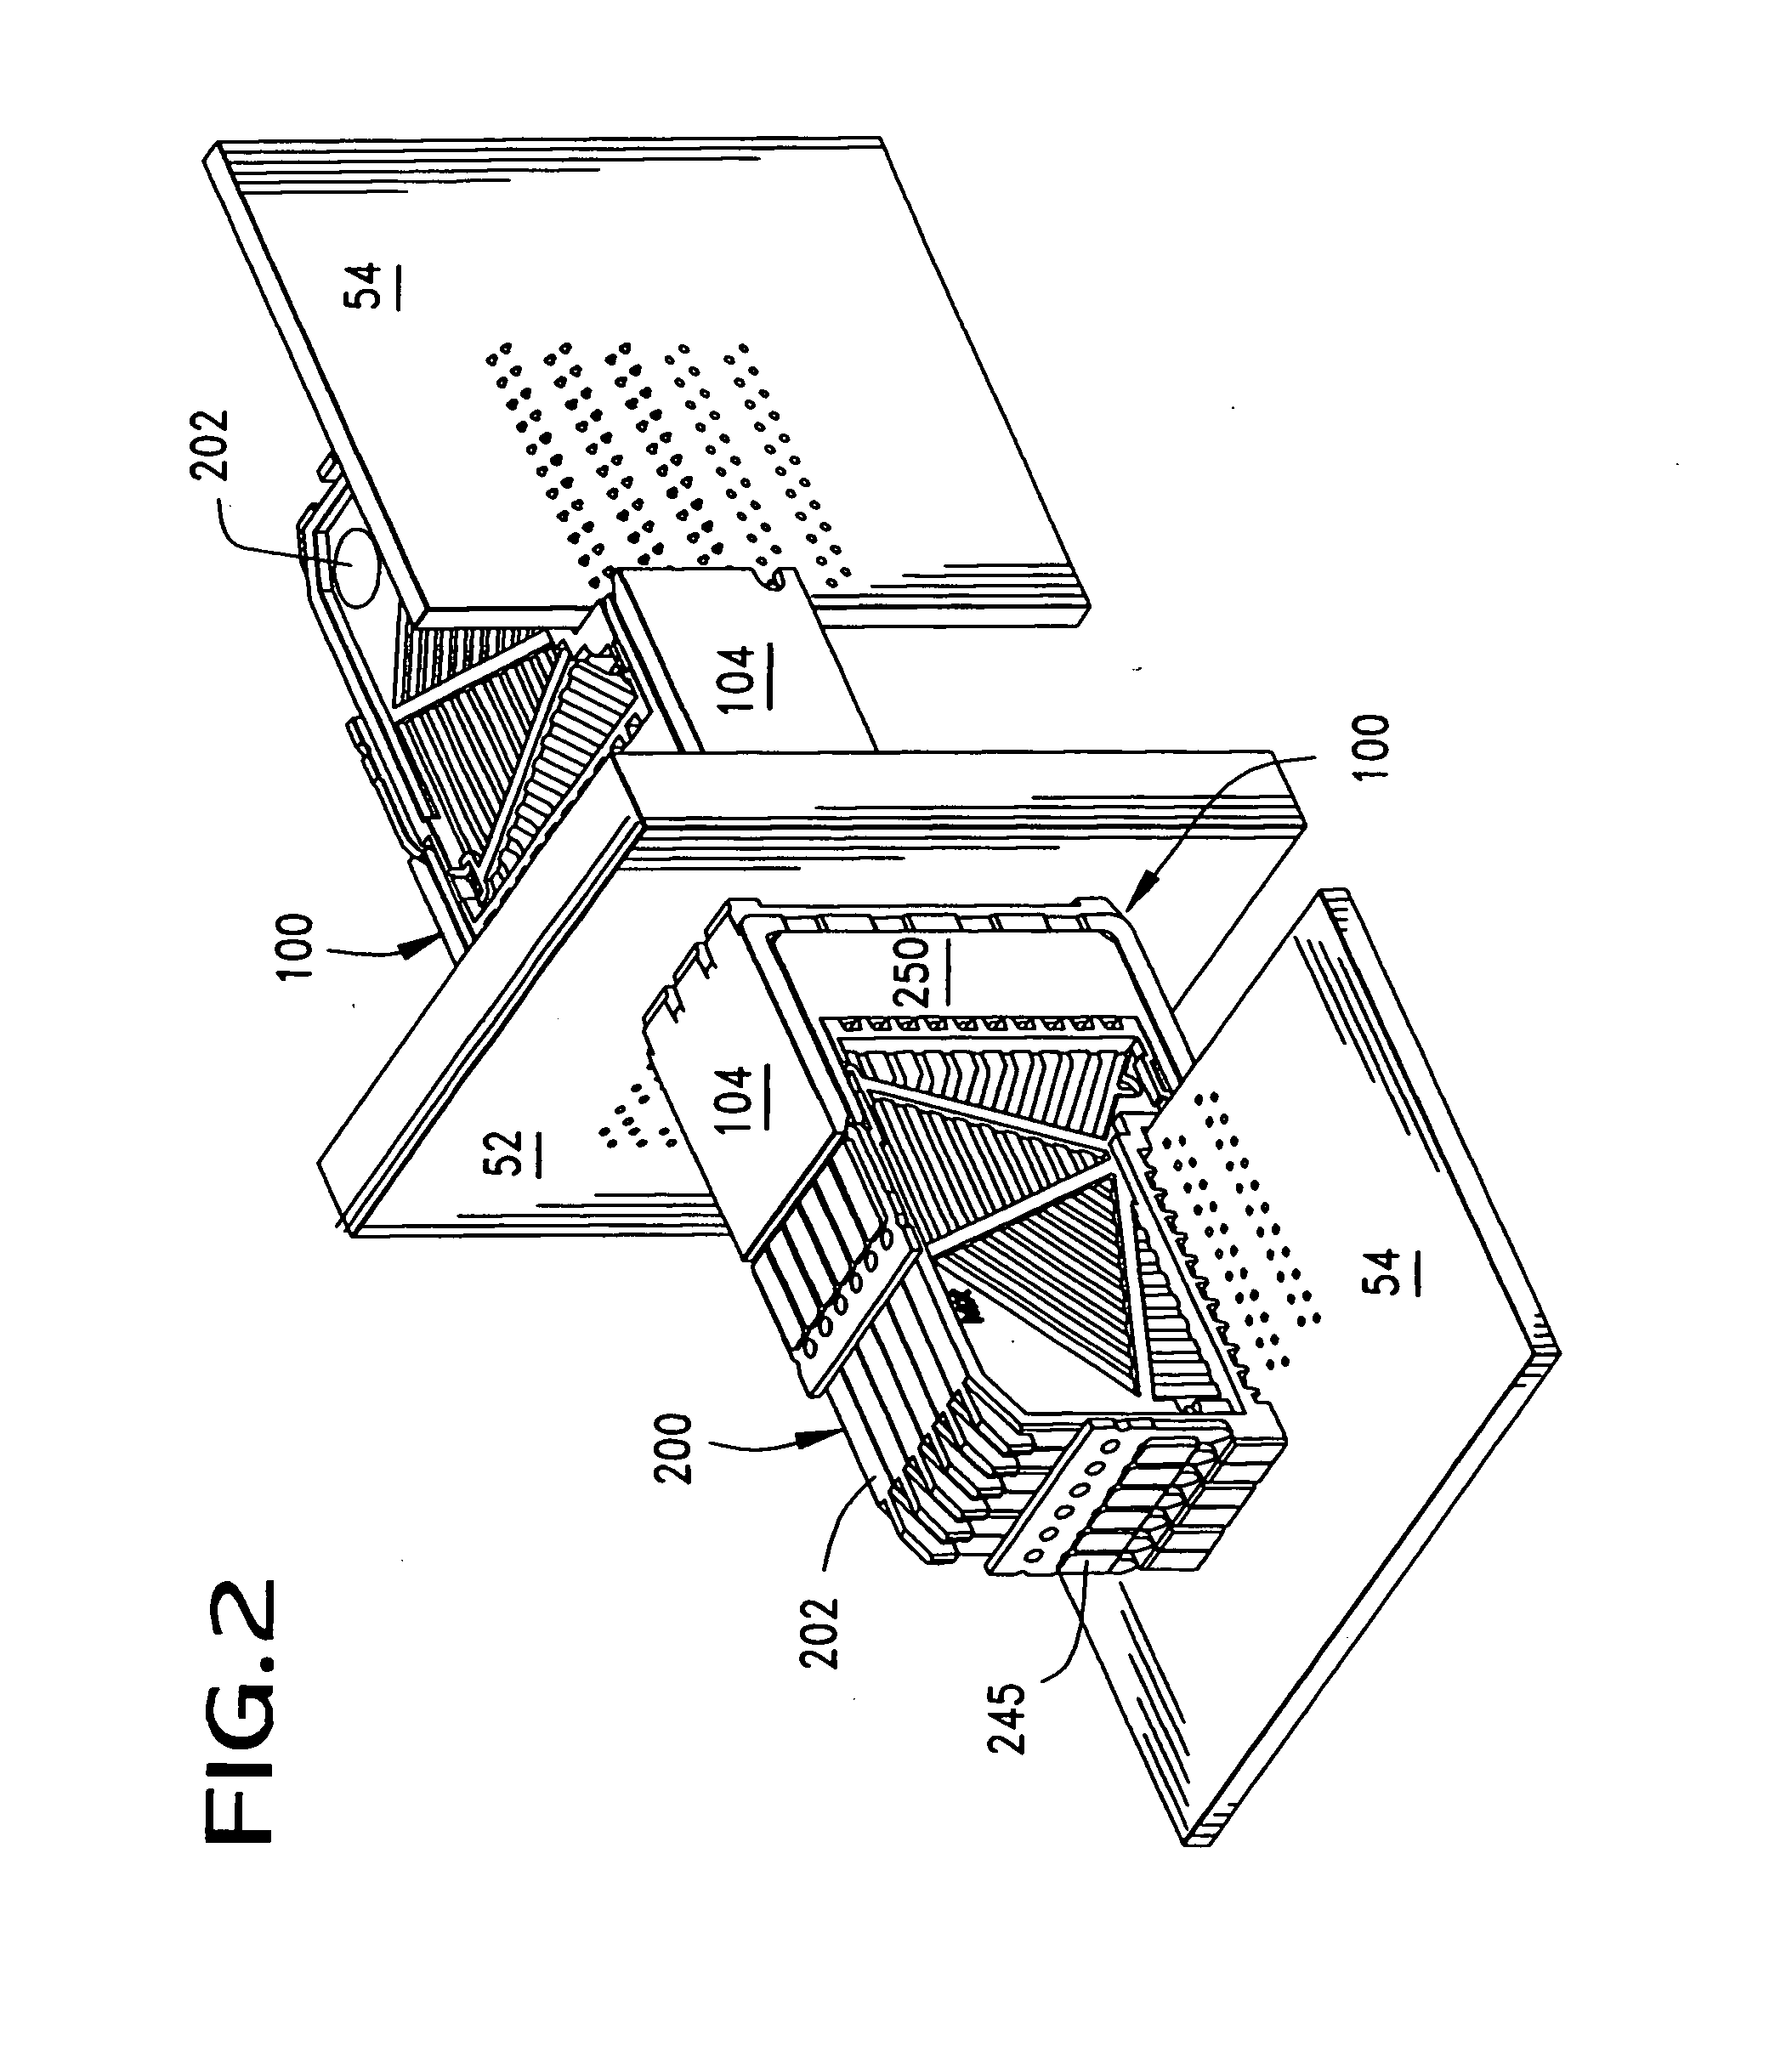 High-density, robust connector with guide means